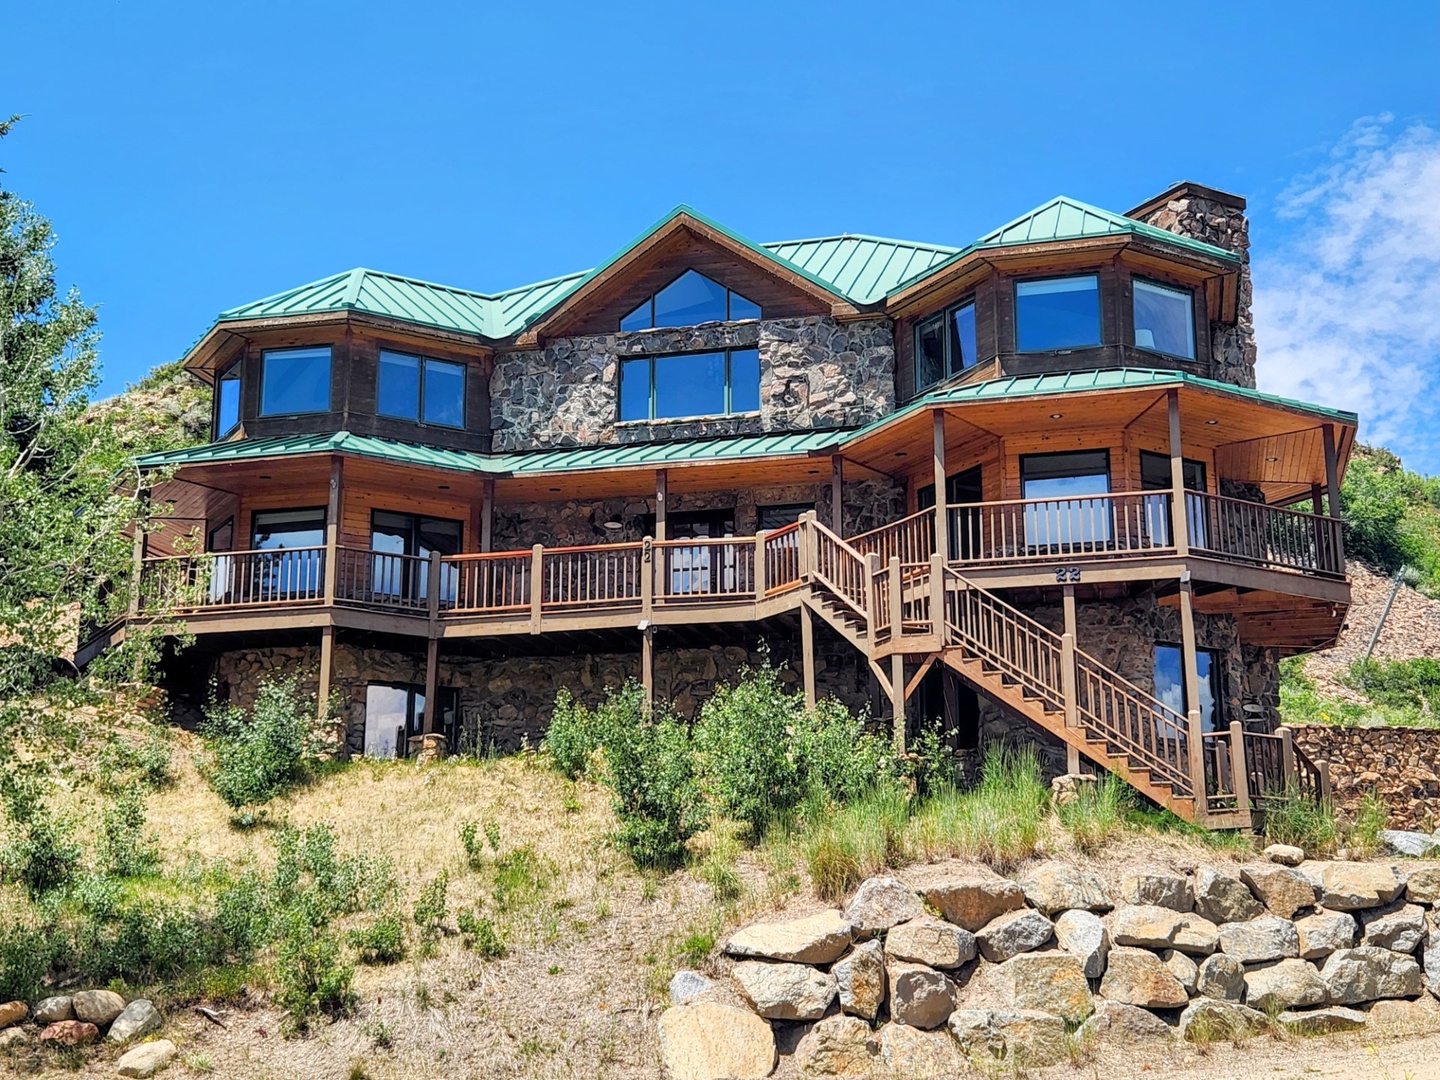 22 Sunflower Drive - Luxury Rental with Hot Tub and Stunning Views of Mt. Crested Butte!